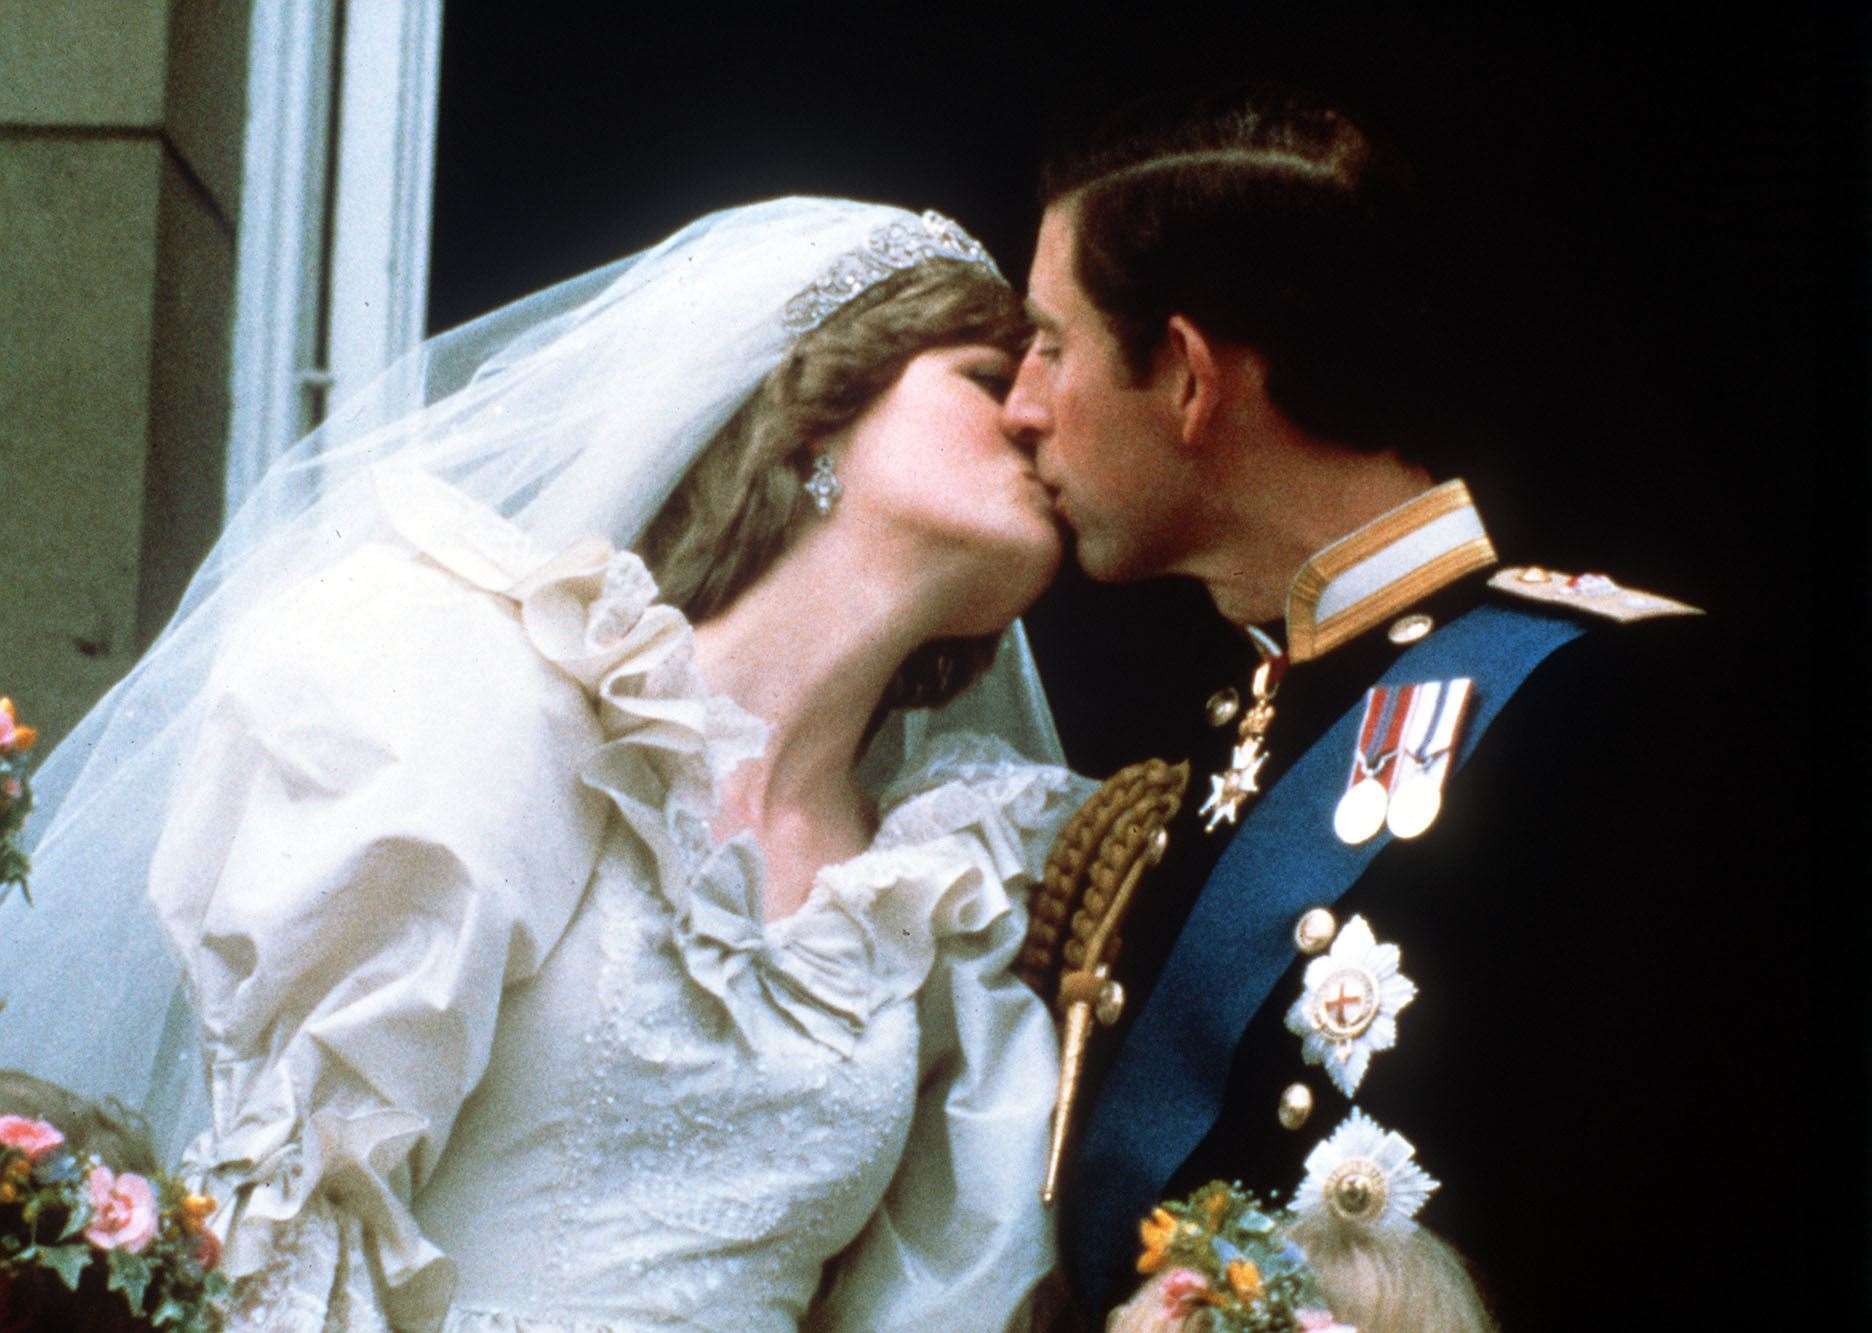 The Prince and Princess of Wales kiss on the balcony of Buckingham Palace after their wedding (PA)